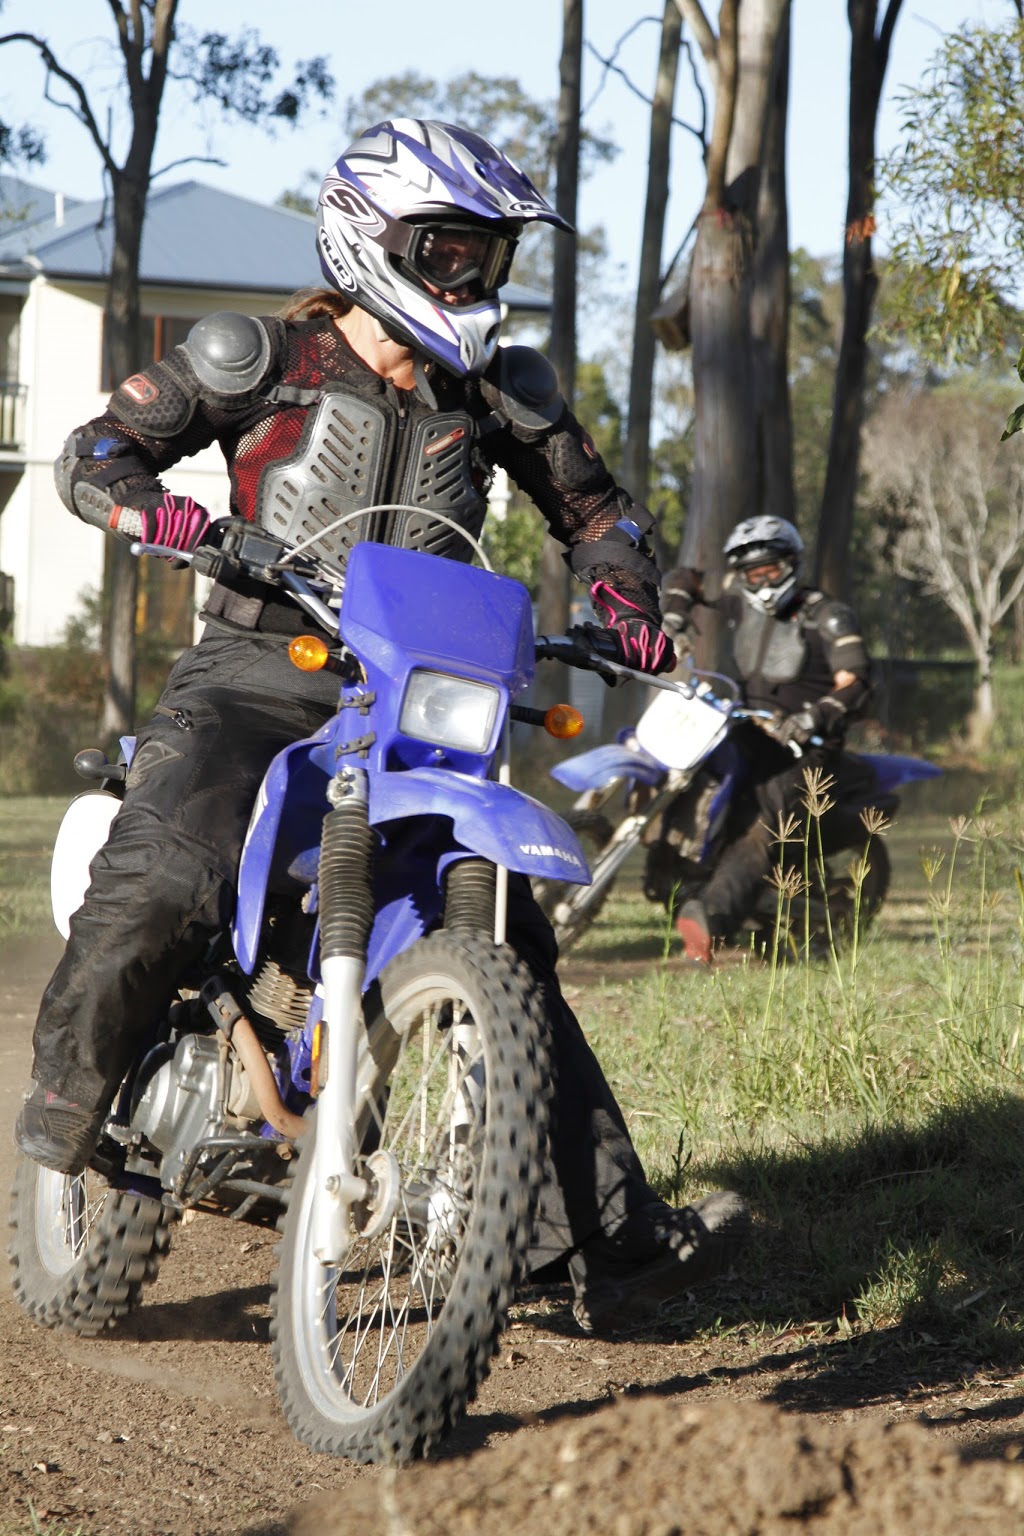 Cycle Right Motorcycle Training Academy | 101 Rickertt Rd, Ransome QLD 4154, Australia | Phone: (07) 3245 1101